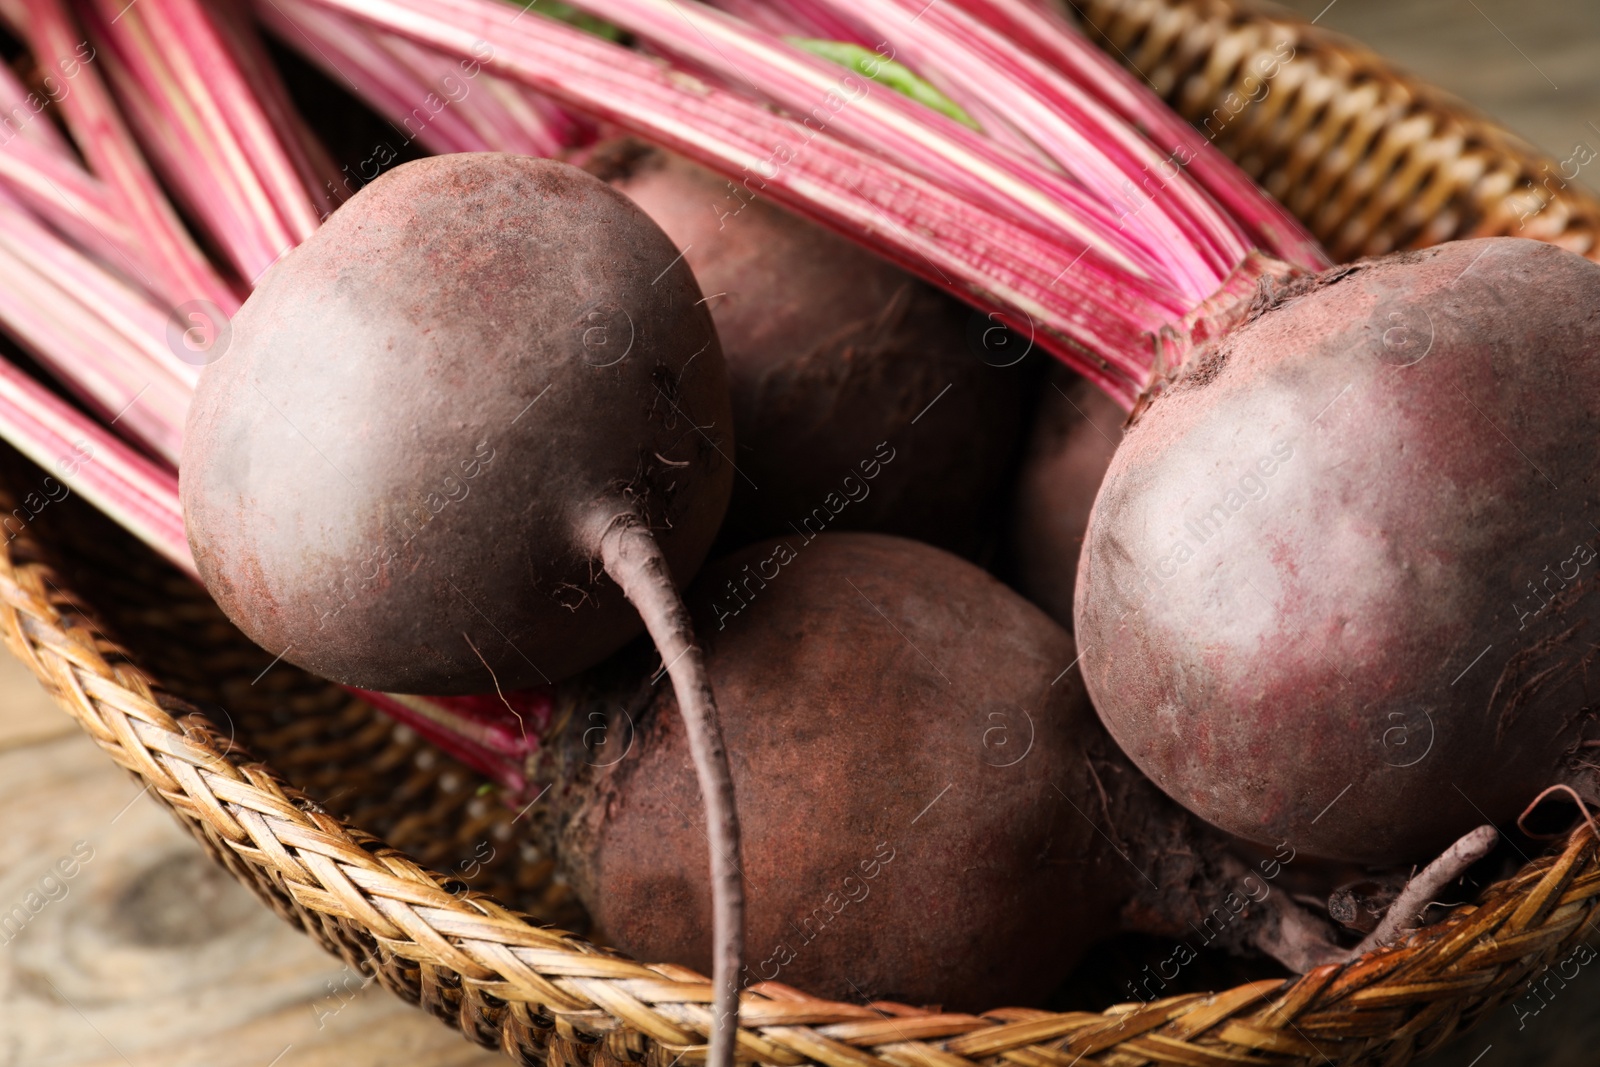 Photo of Raw ripe beets in wicker bowl, closeup